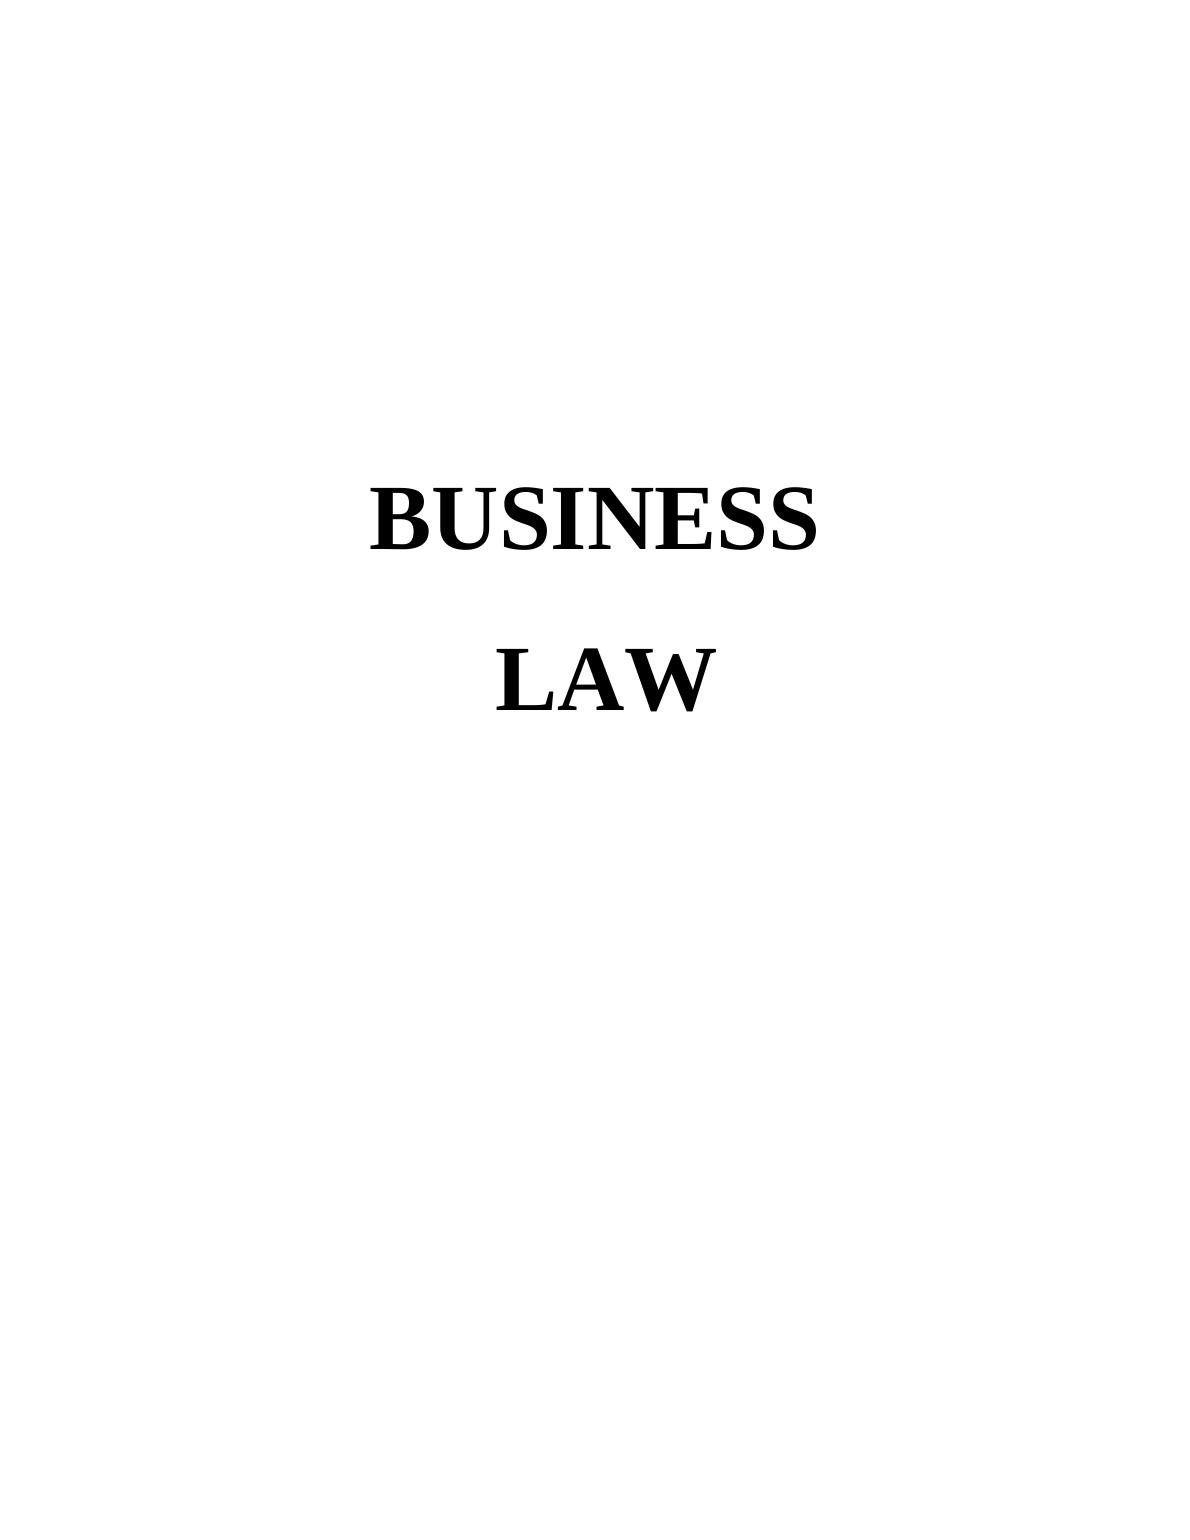 Business Law Assignment Sample_1